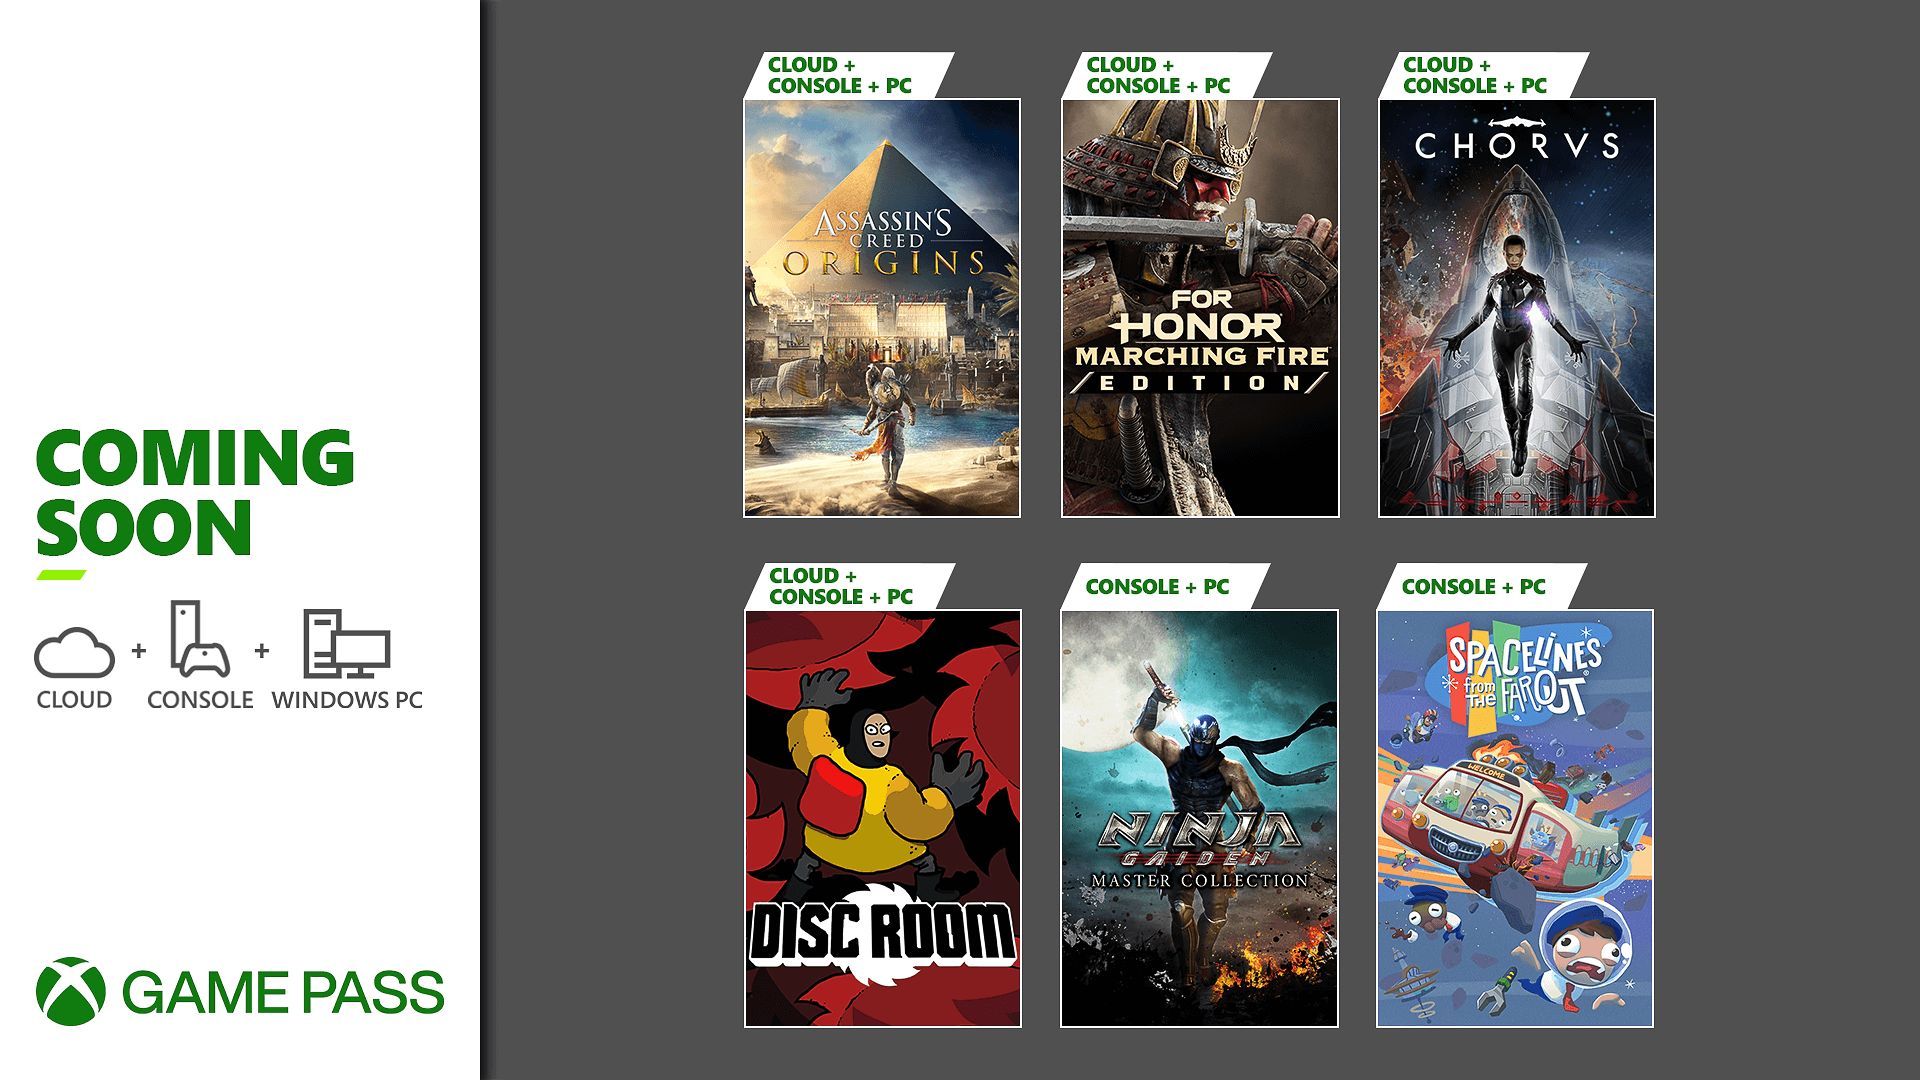 stad Lijm saai Coming to Xbox Game Pass: Assassin's Creed Origins, For Honor: Marching  Fire Edition, and More - Xbox Wire